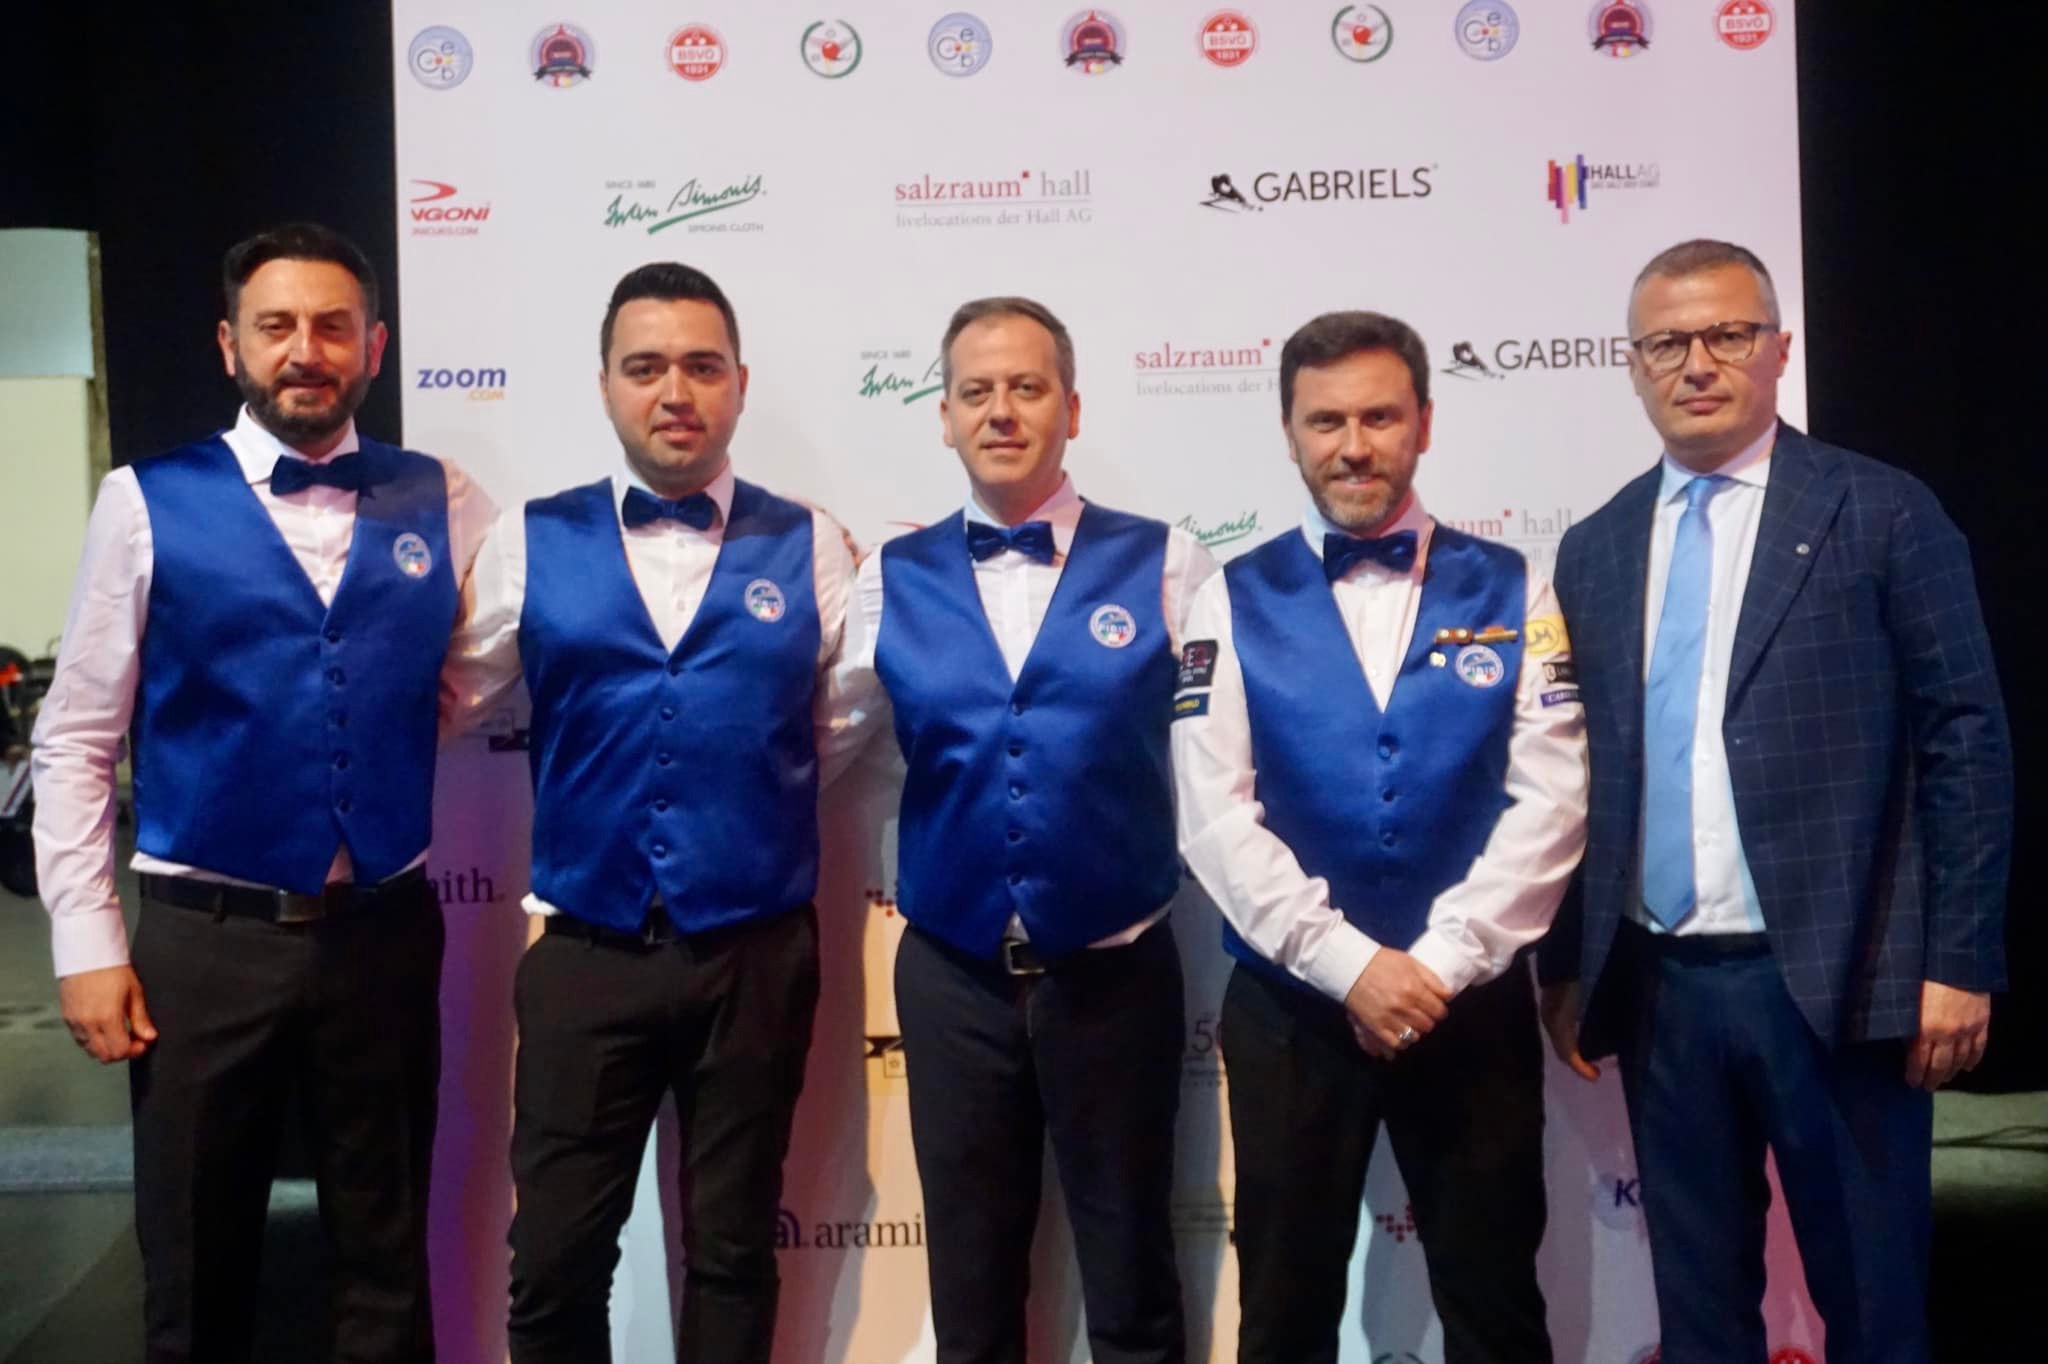 DAY 1 – COUPE D’EUROPE FOR NATIONAL TEAM: GRANDE PARTENZA DELL’ITALIA TEAM 